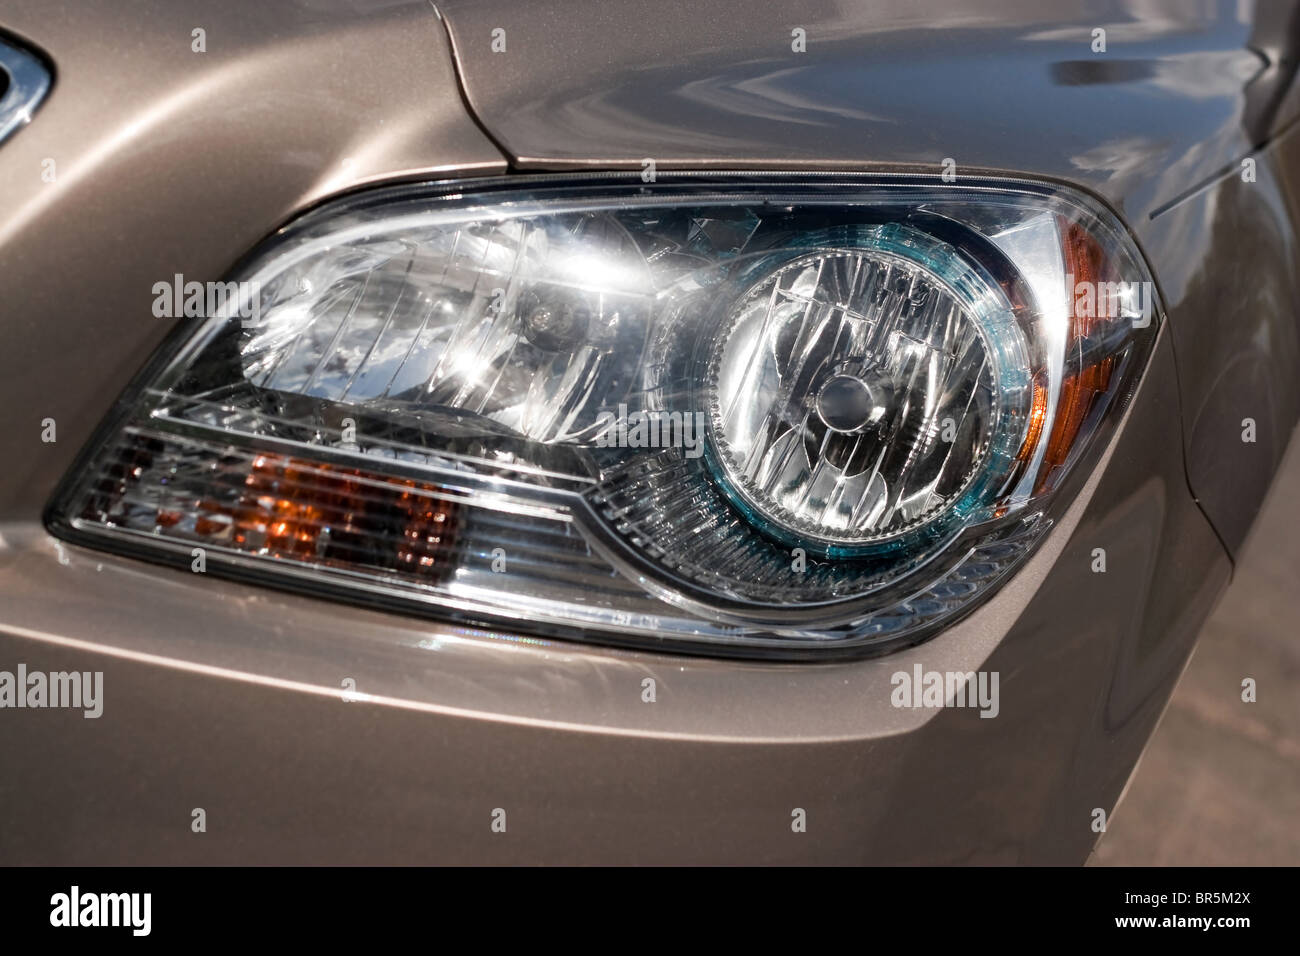 Closeup detail of a car headlight on a modern vehicle with metallic paint. Stock Photo